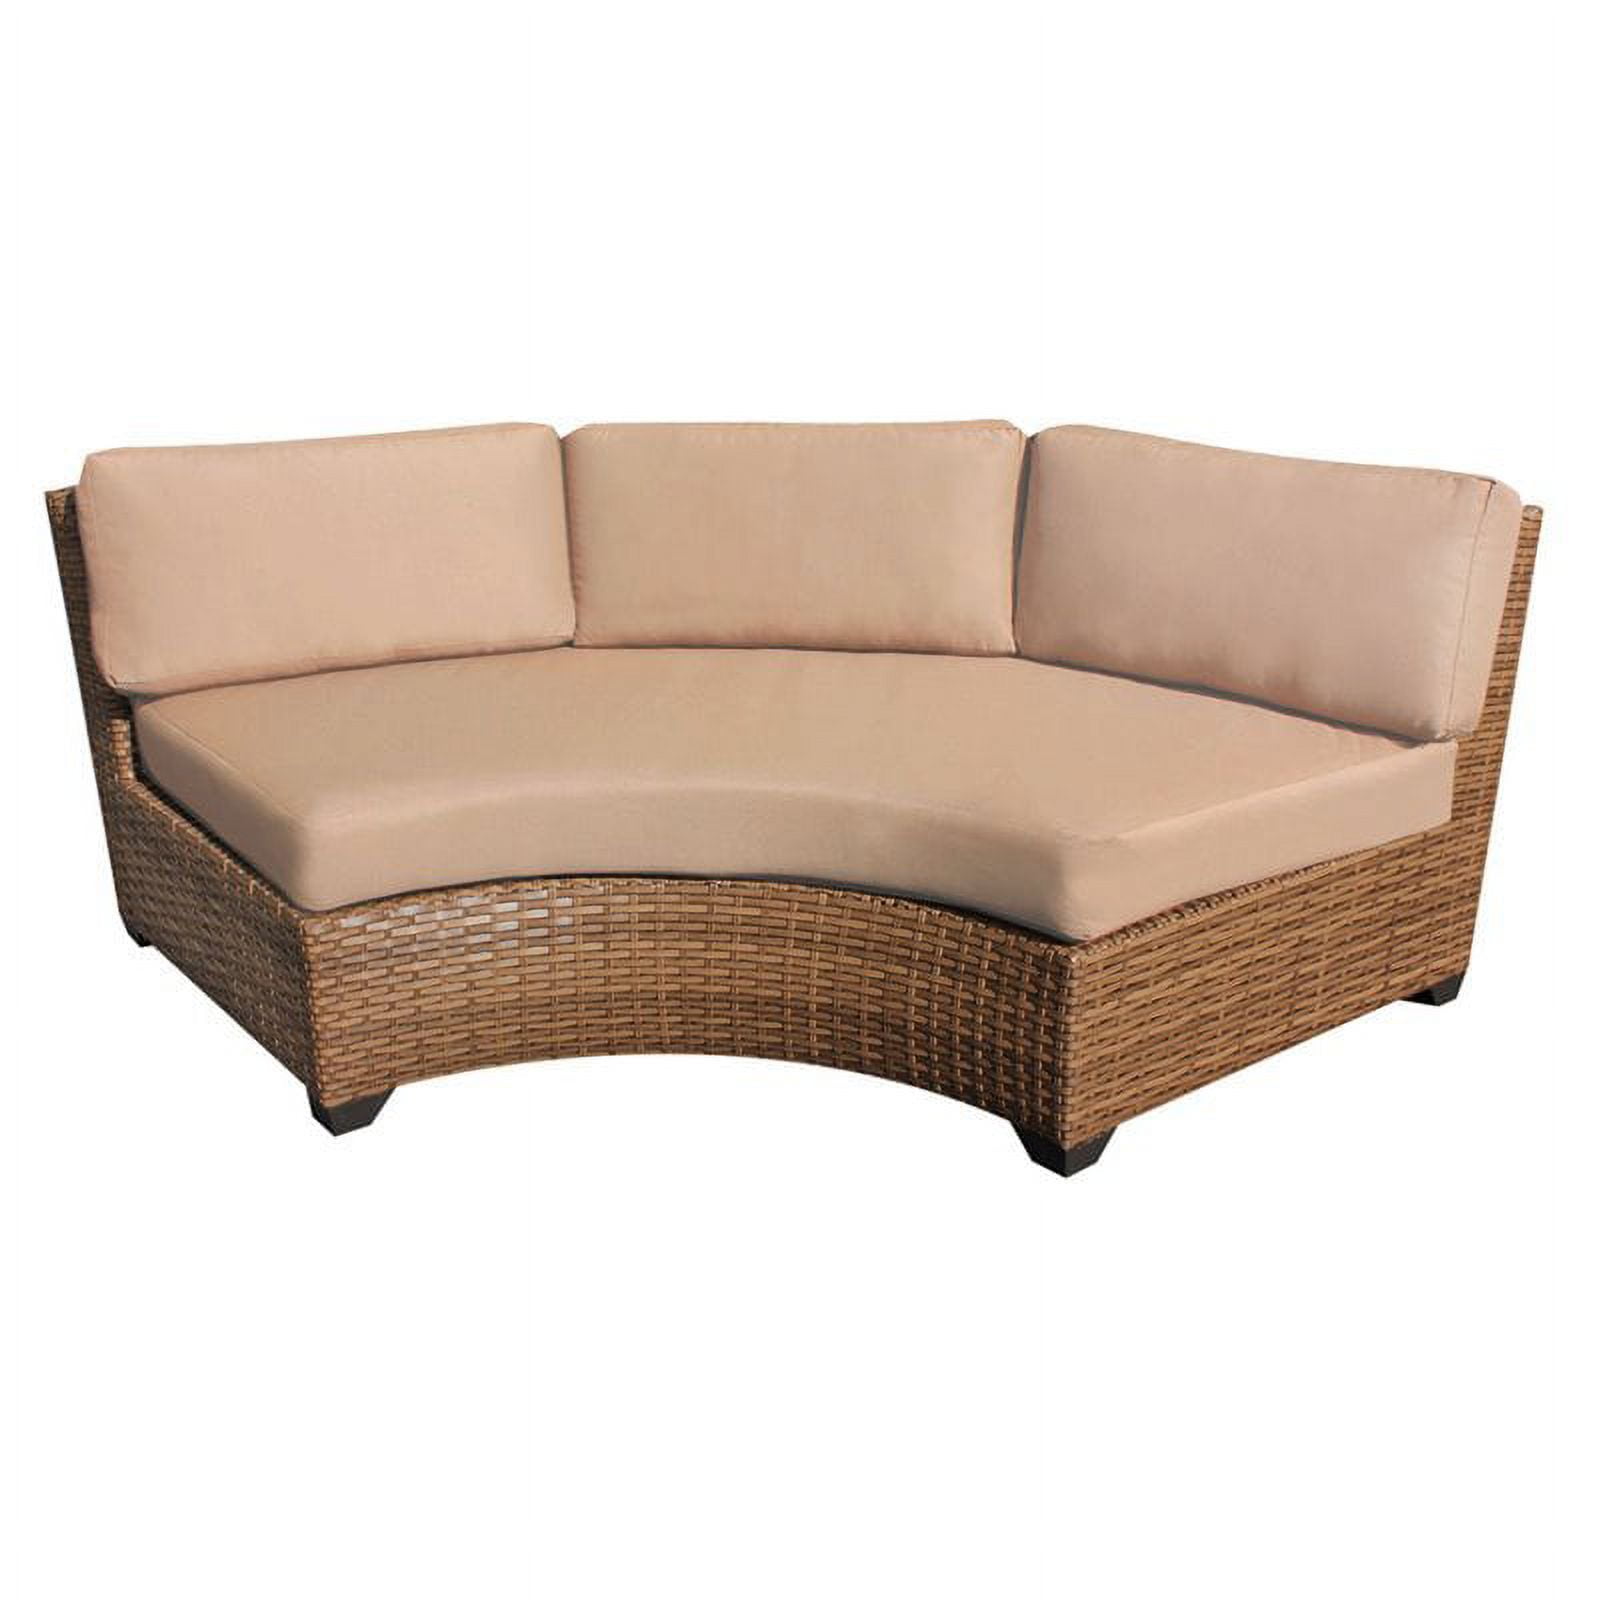 Afuera Living Curved Armless Hand Woven Wicker Patio Sofa In Grey Set Of 2